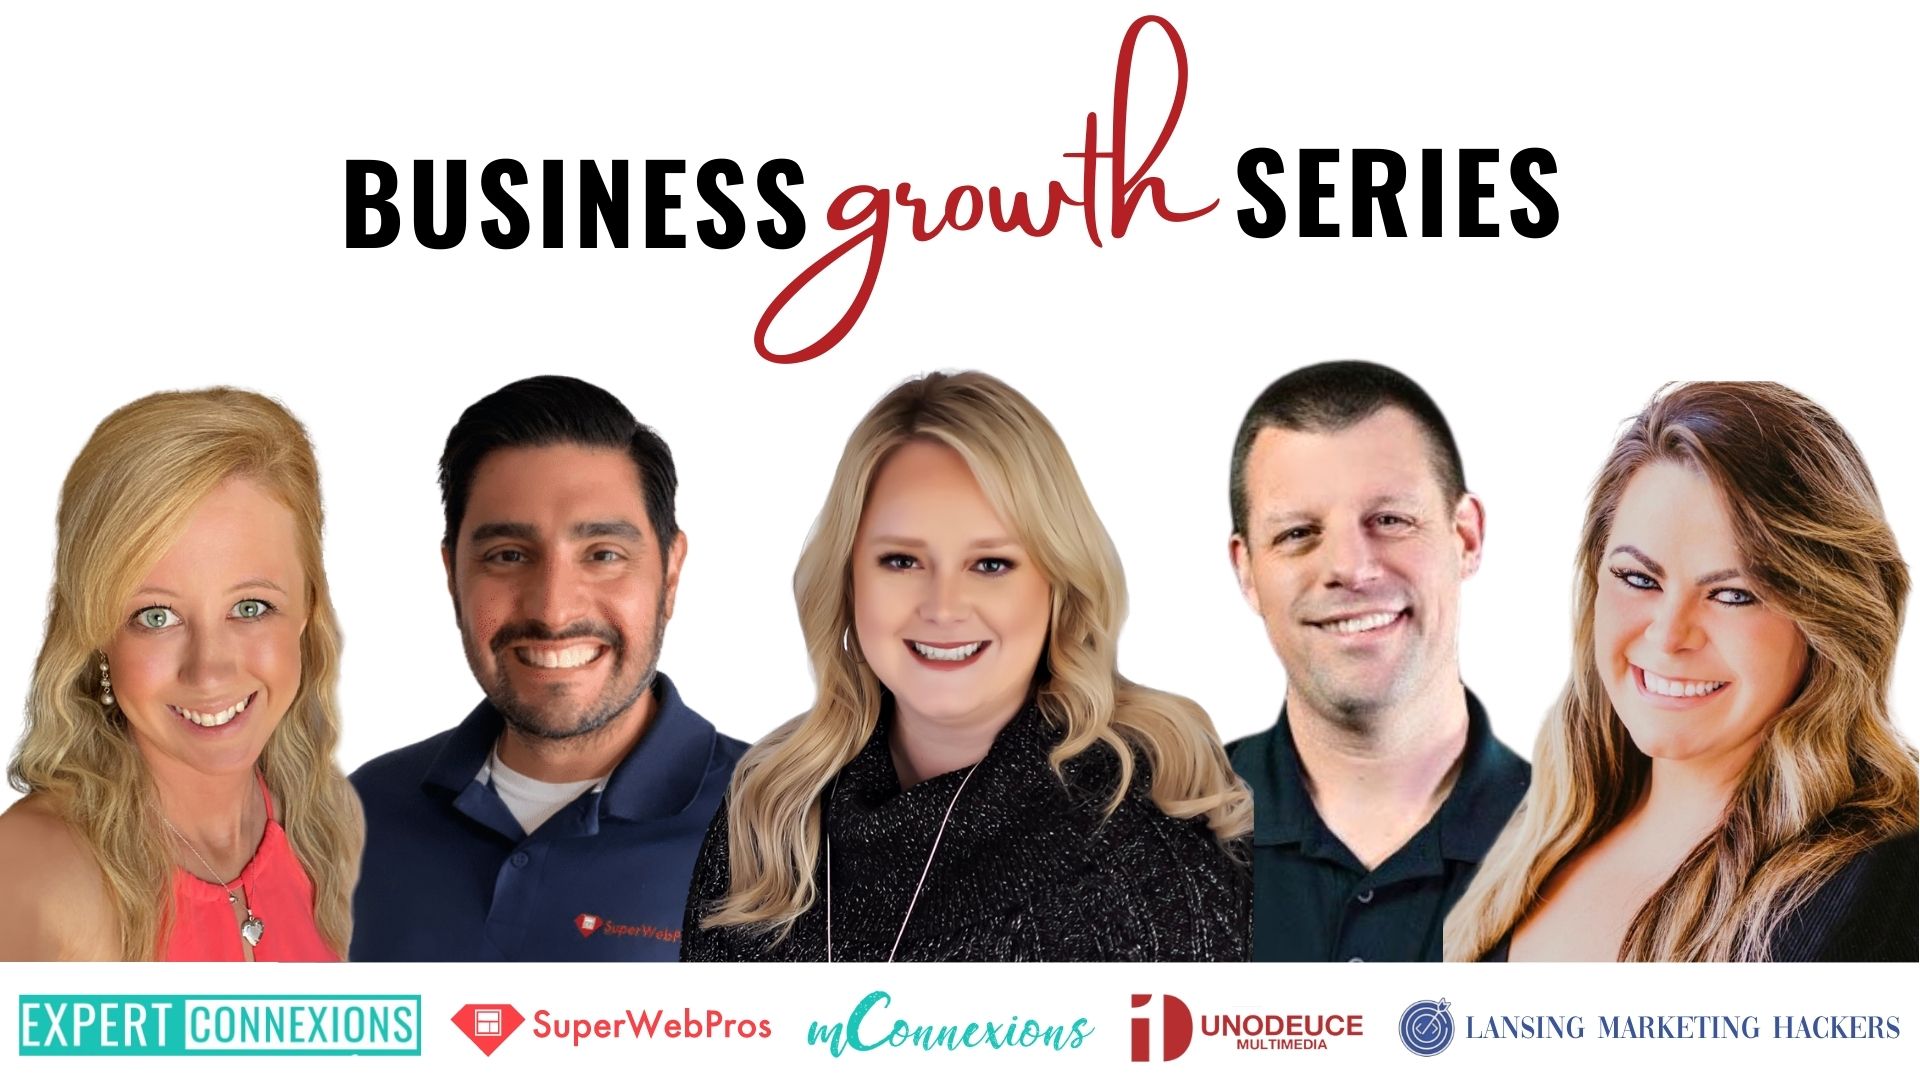 mConnexions Business Growth Series